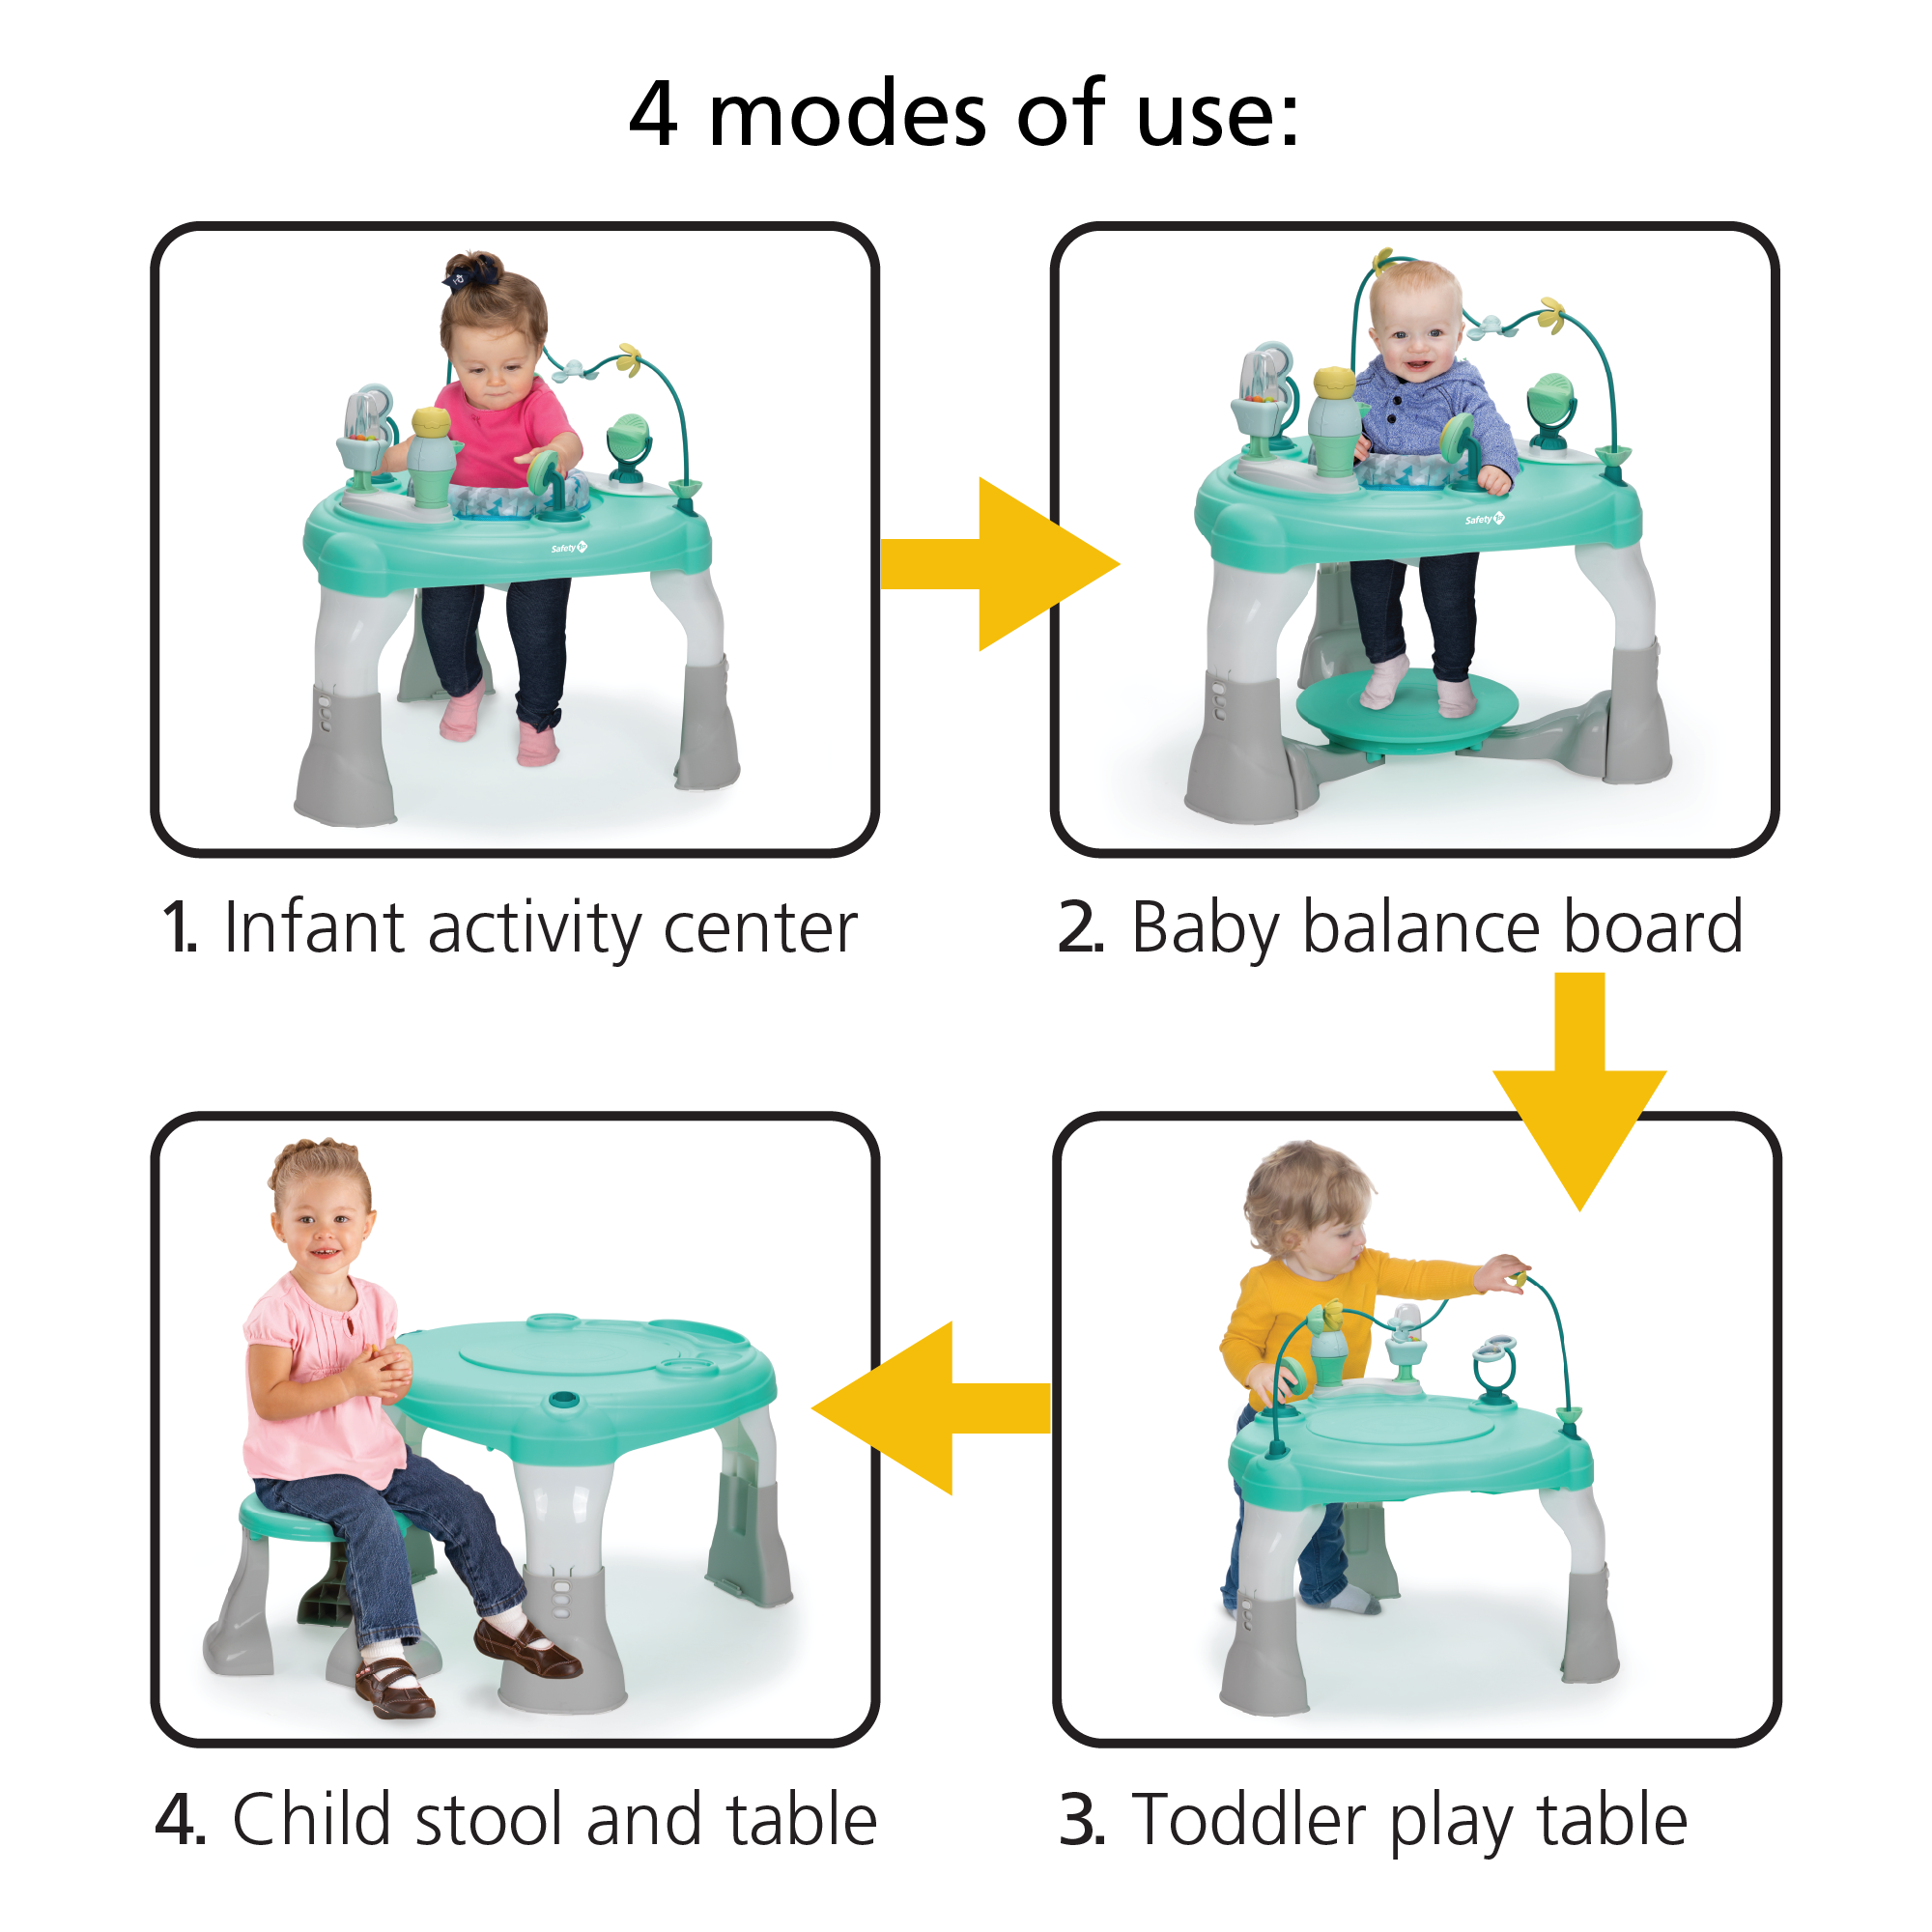 Infant activity center, baby balance board, child stool and table, toddler play table